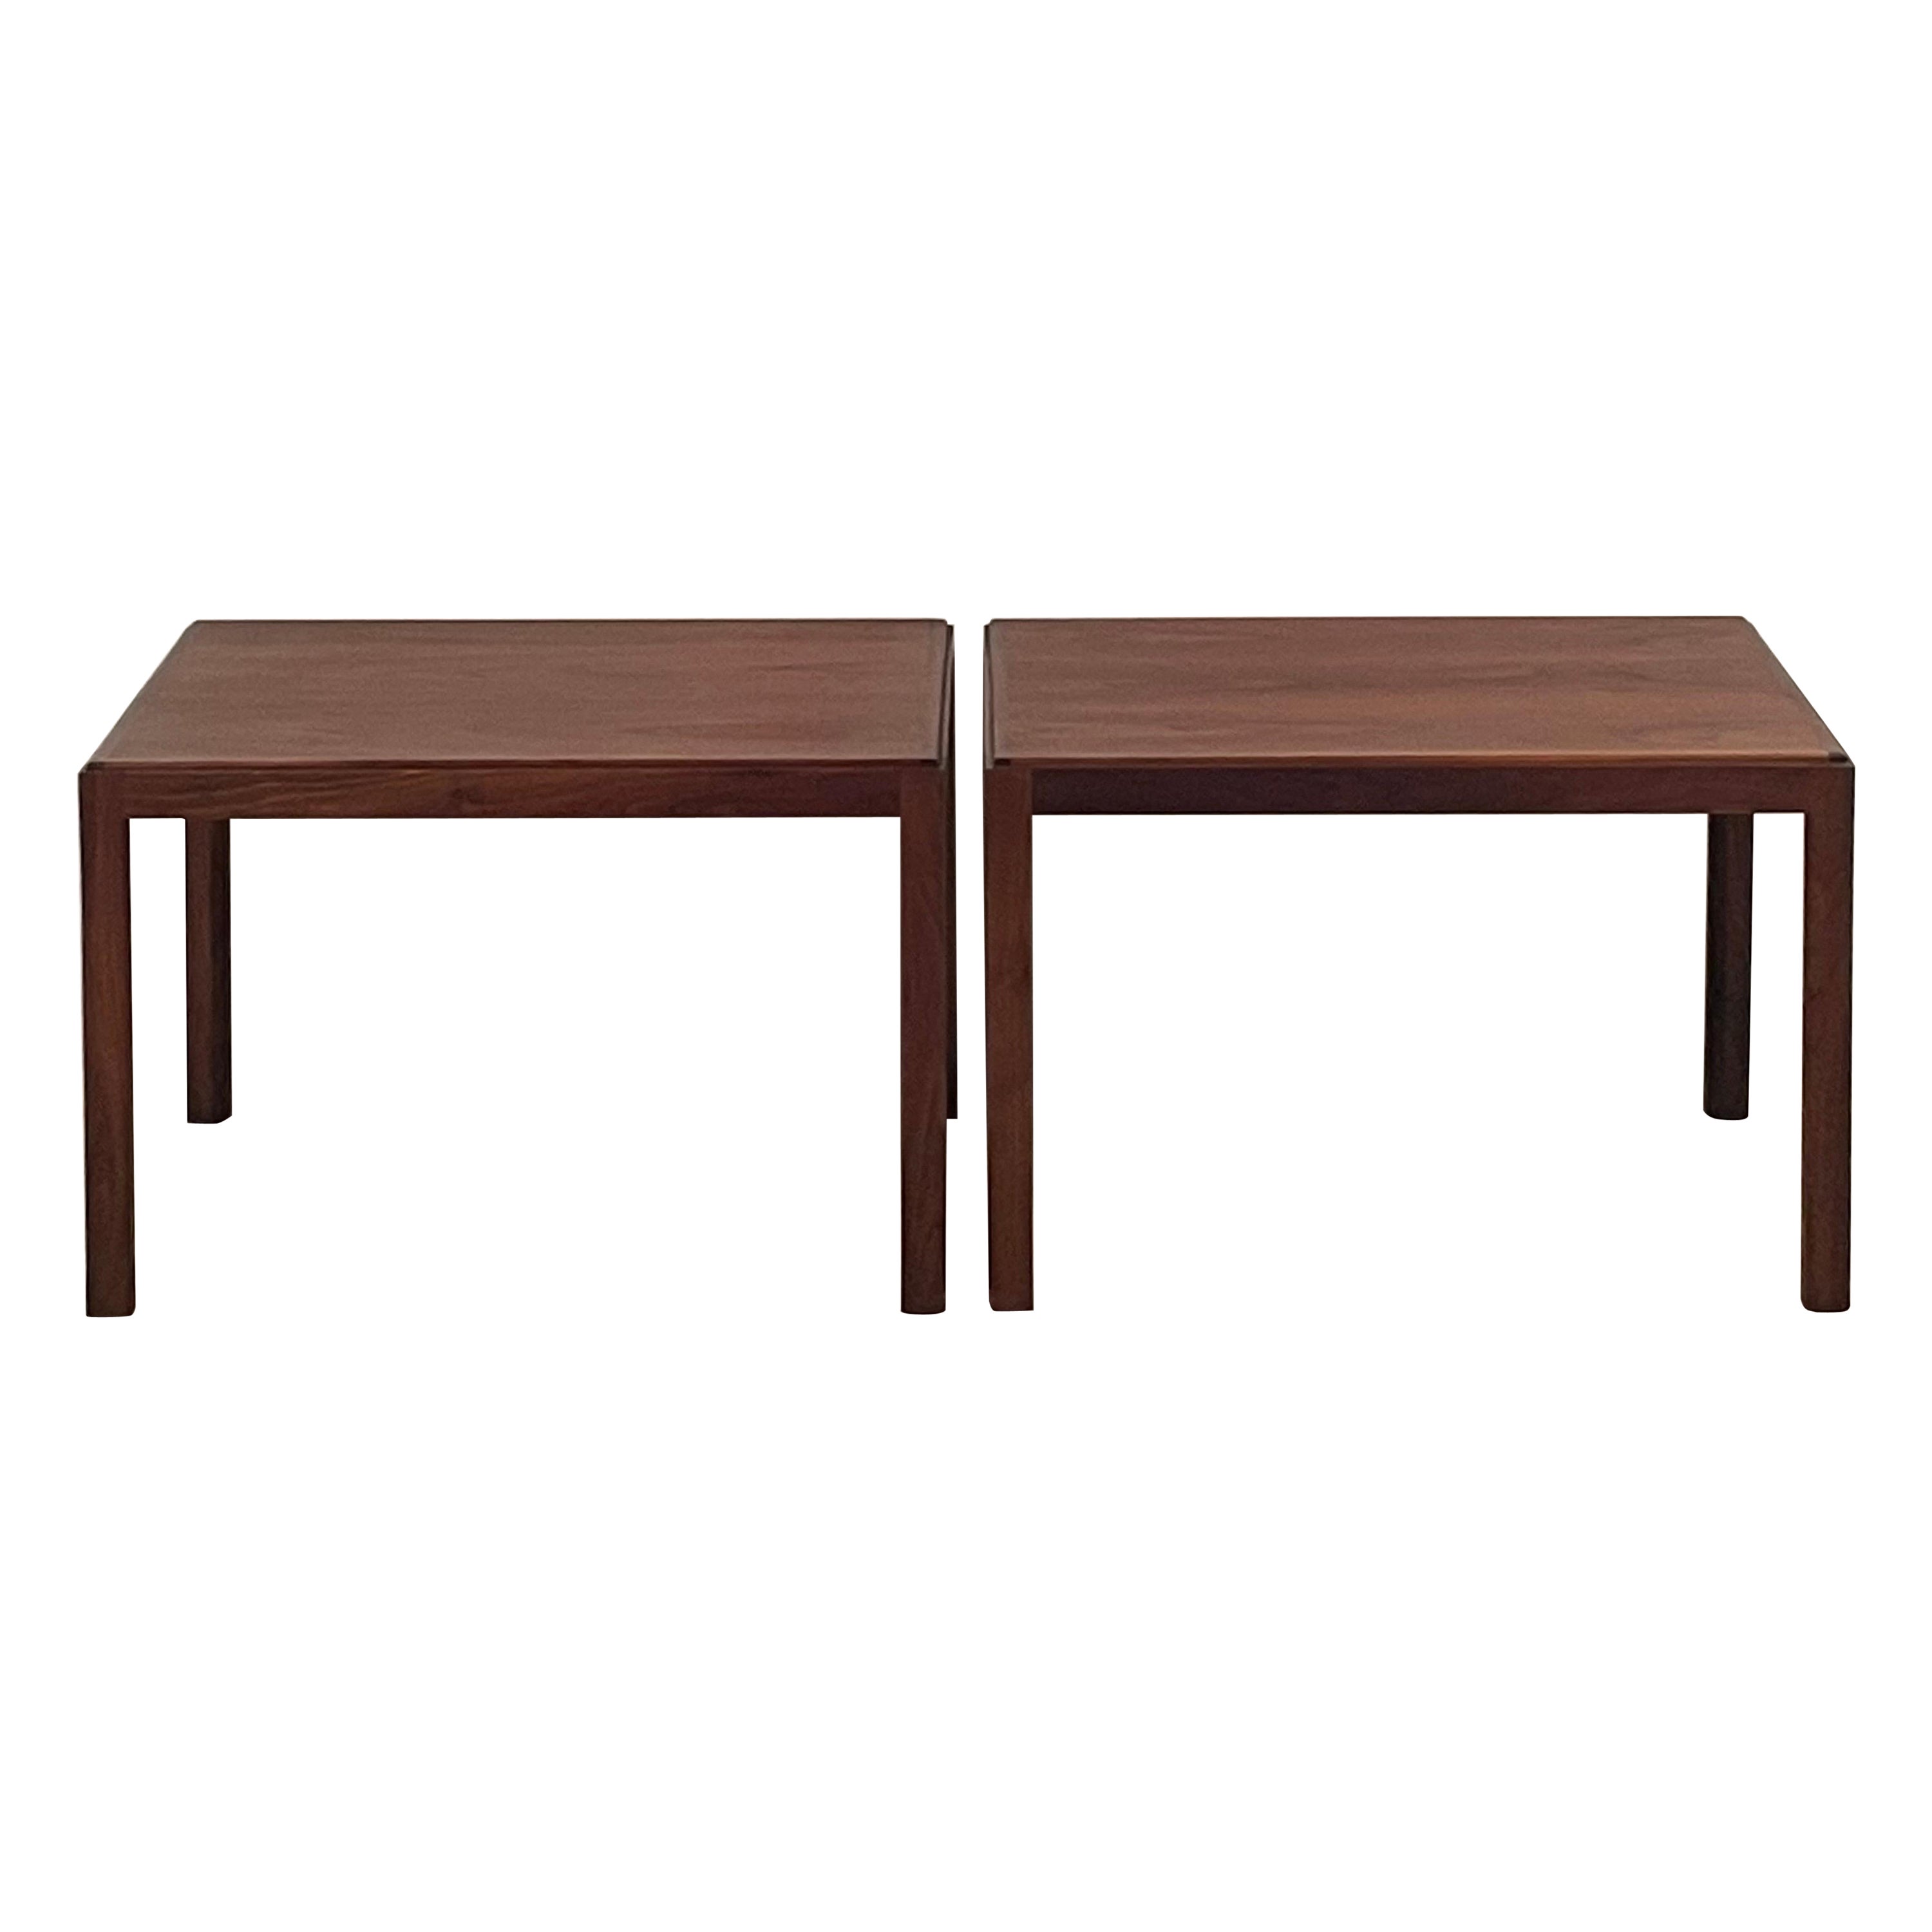 Pair of Understated Walnut End Tables by Brown Saltman